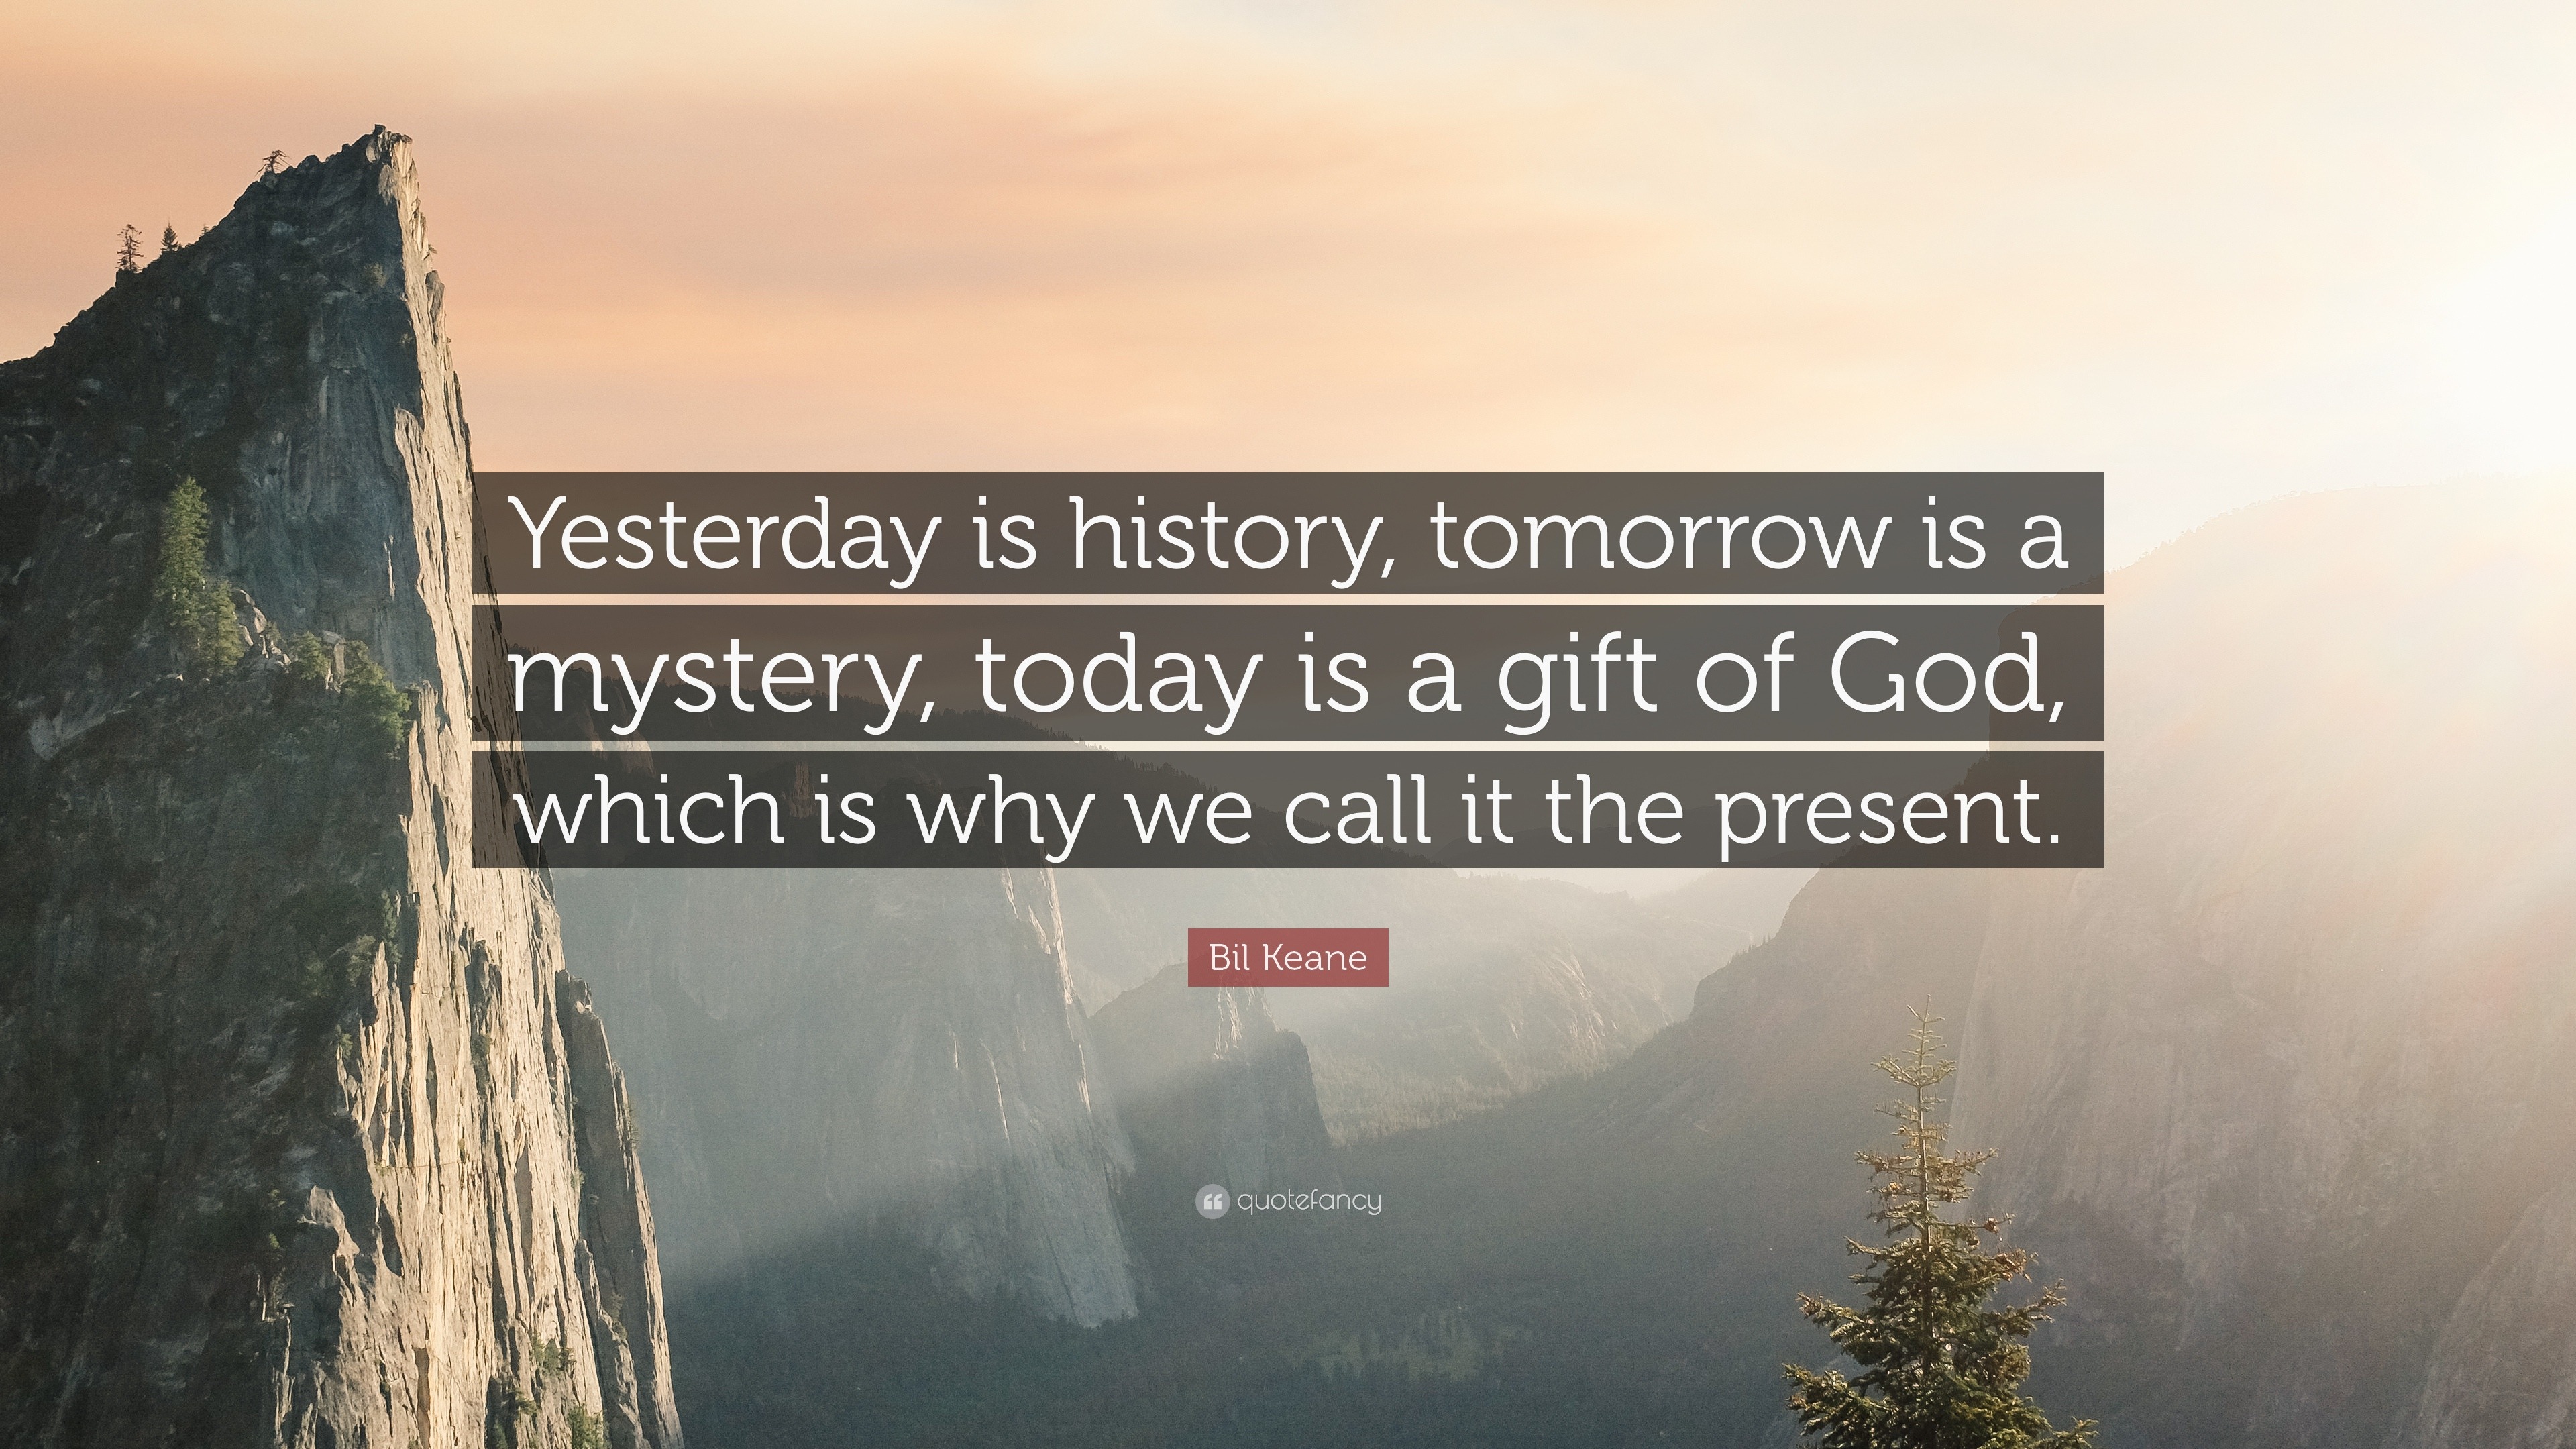 Is mystery tomorrow is today gift アメリカ人が選んだ英会話フレーズ: Yesterday